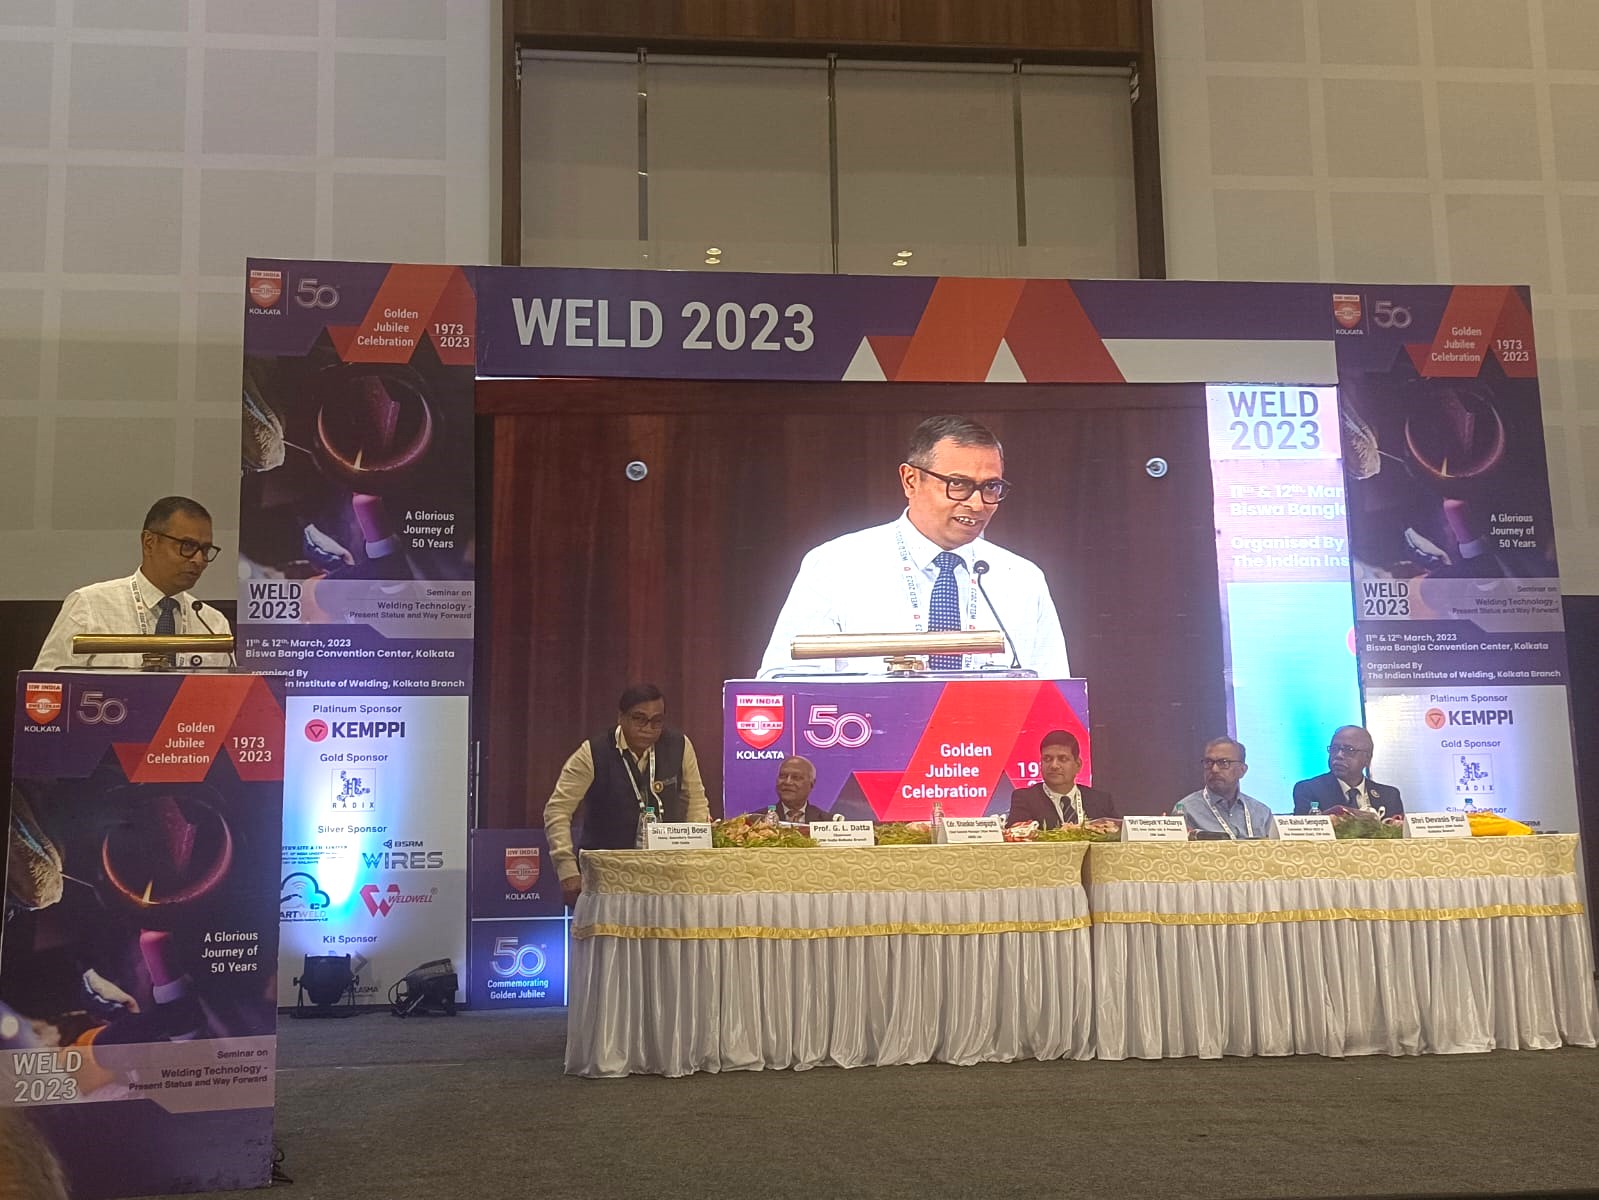 Image 1 - Inaugural Address by Cdr B Sengupta IN (Retd.),CGM(MW) at Golden Jubilee Seminar of Indian Institute of Welding, Biswa Bangla Convention Centre on 11 Mar 23